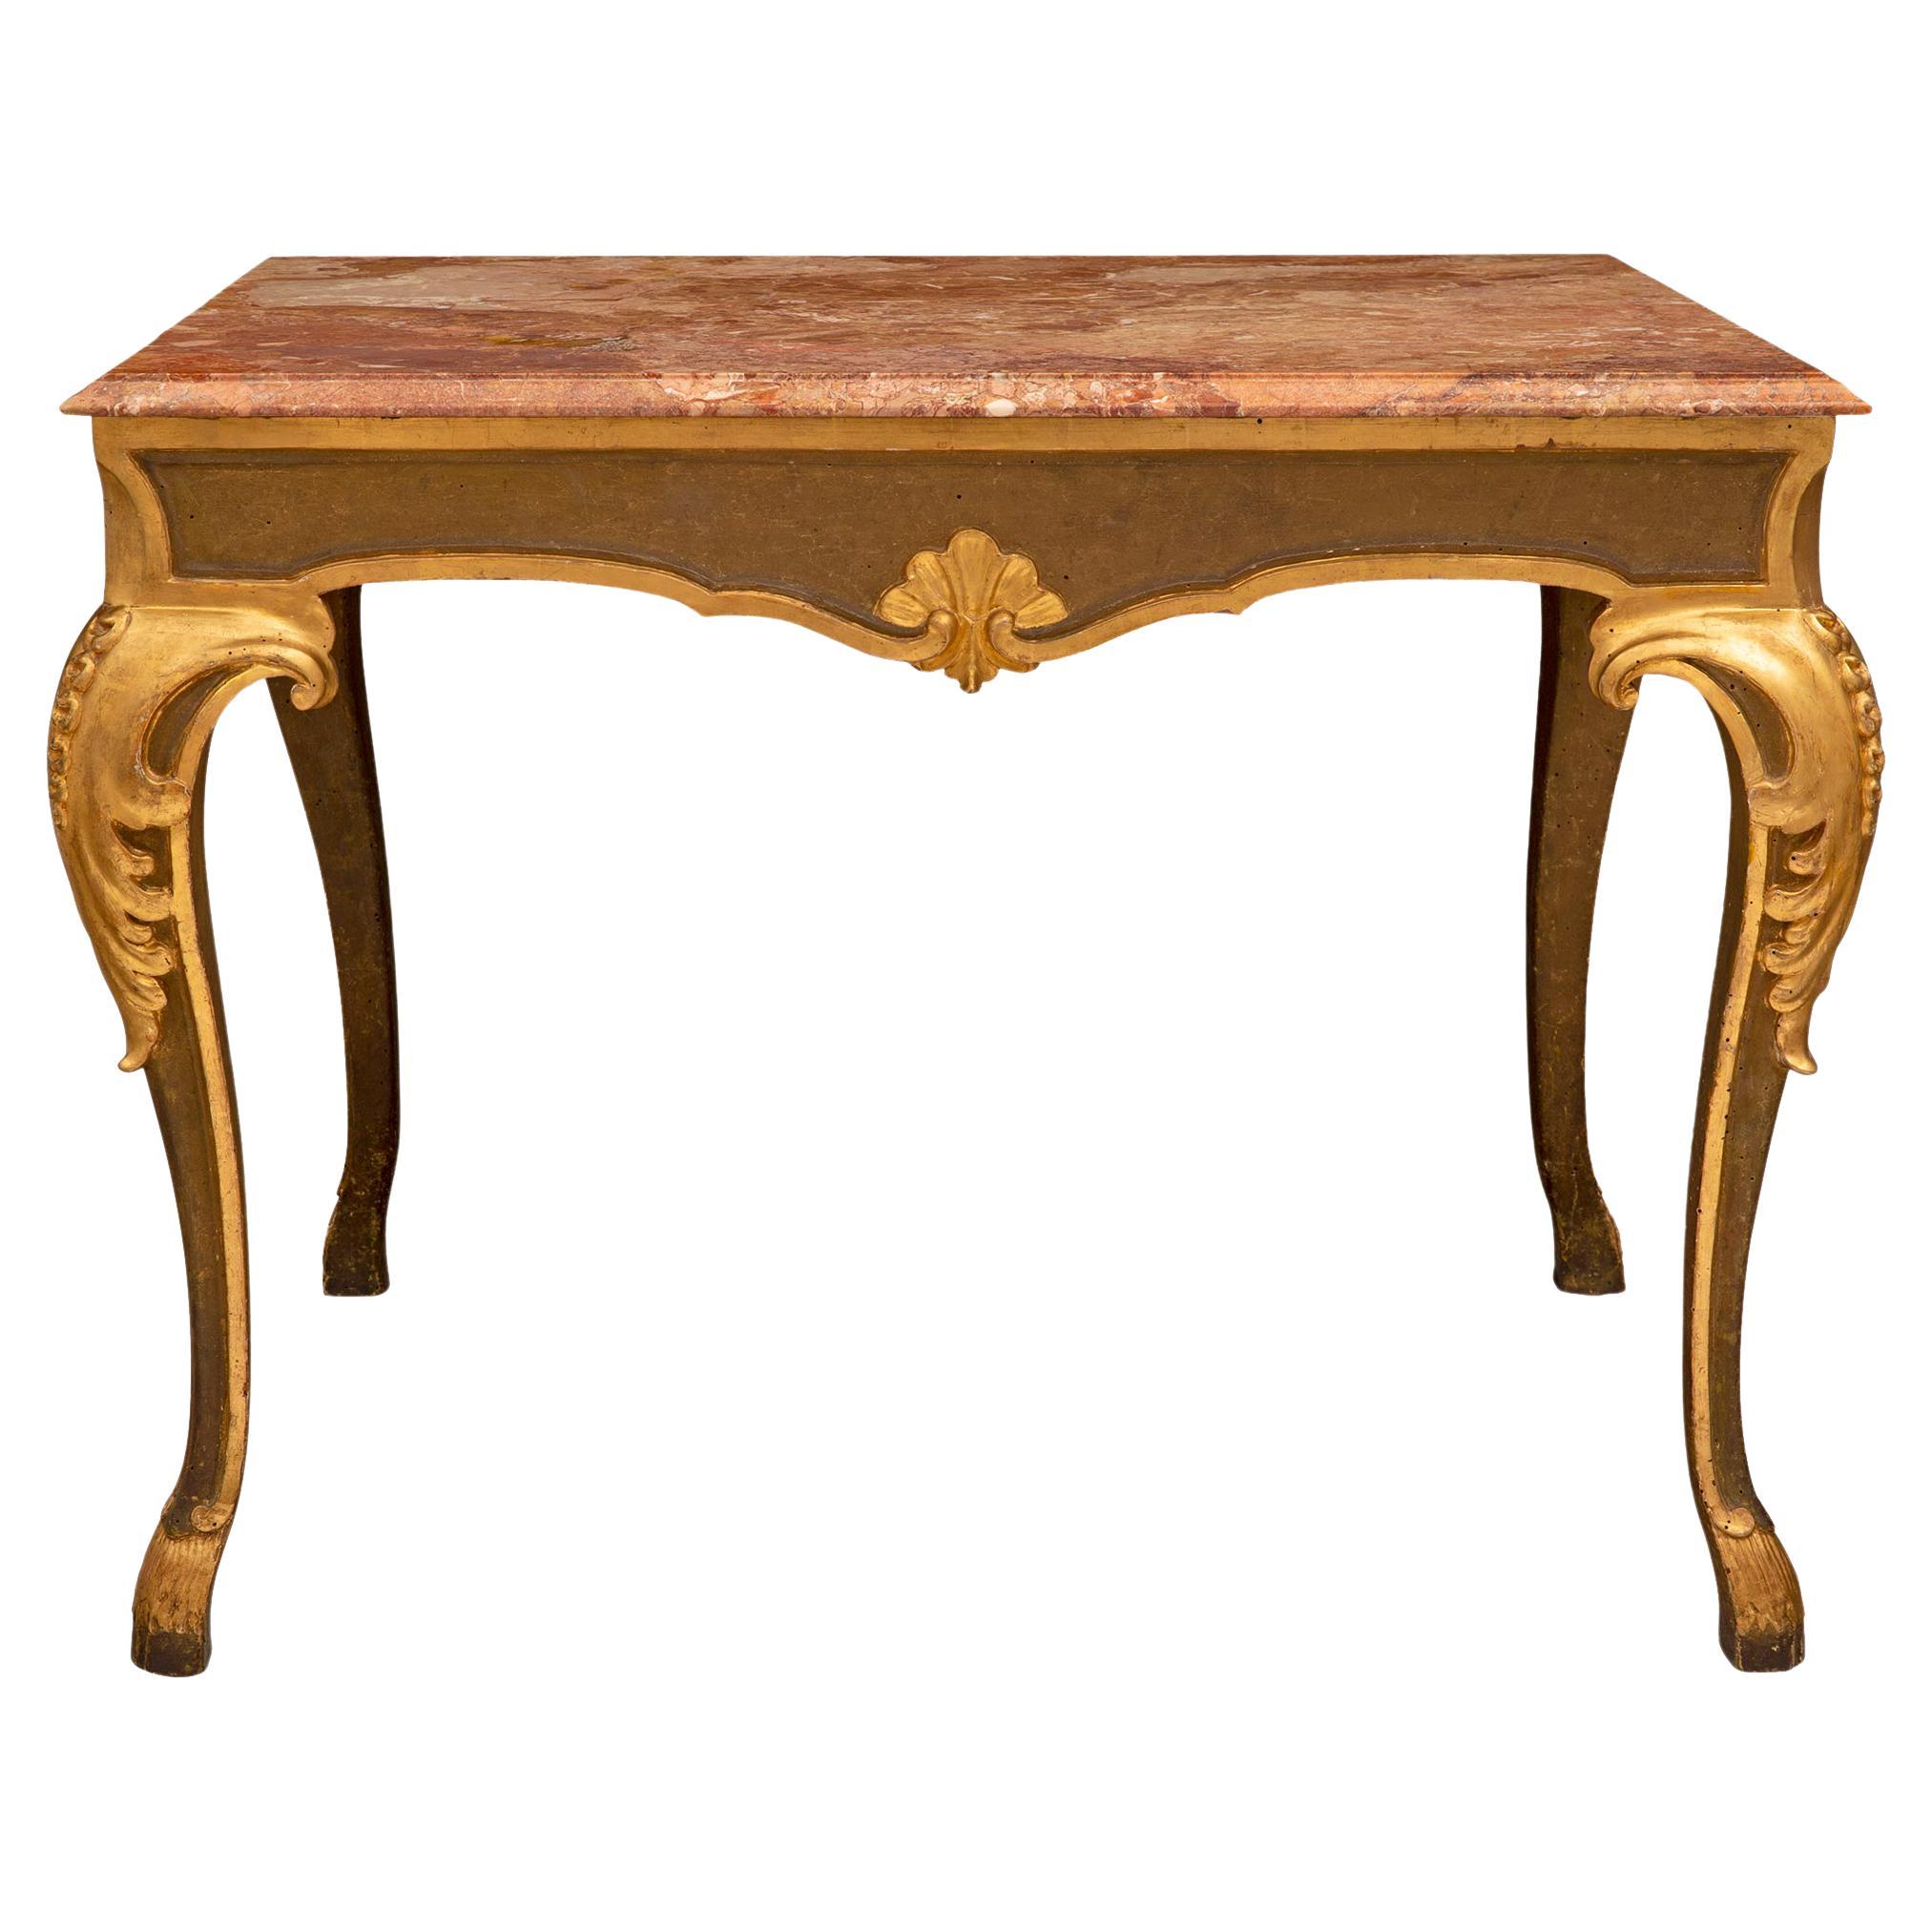 Italian 18th Century Louis XV Period Polychrome and Giltwood Center Table For Sale